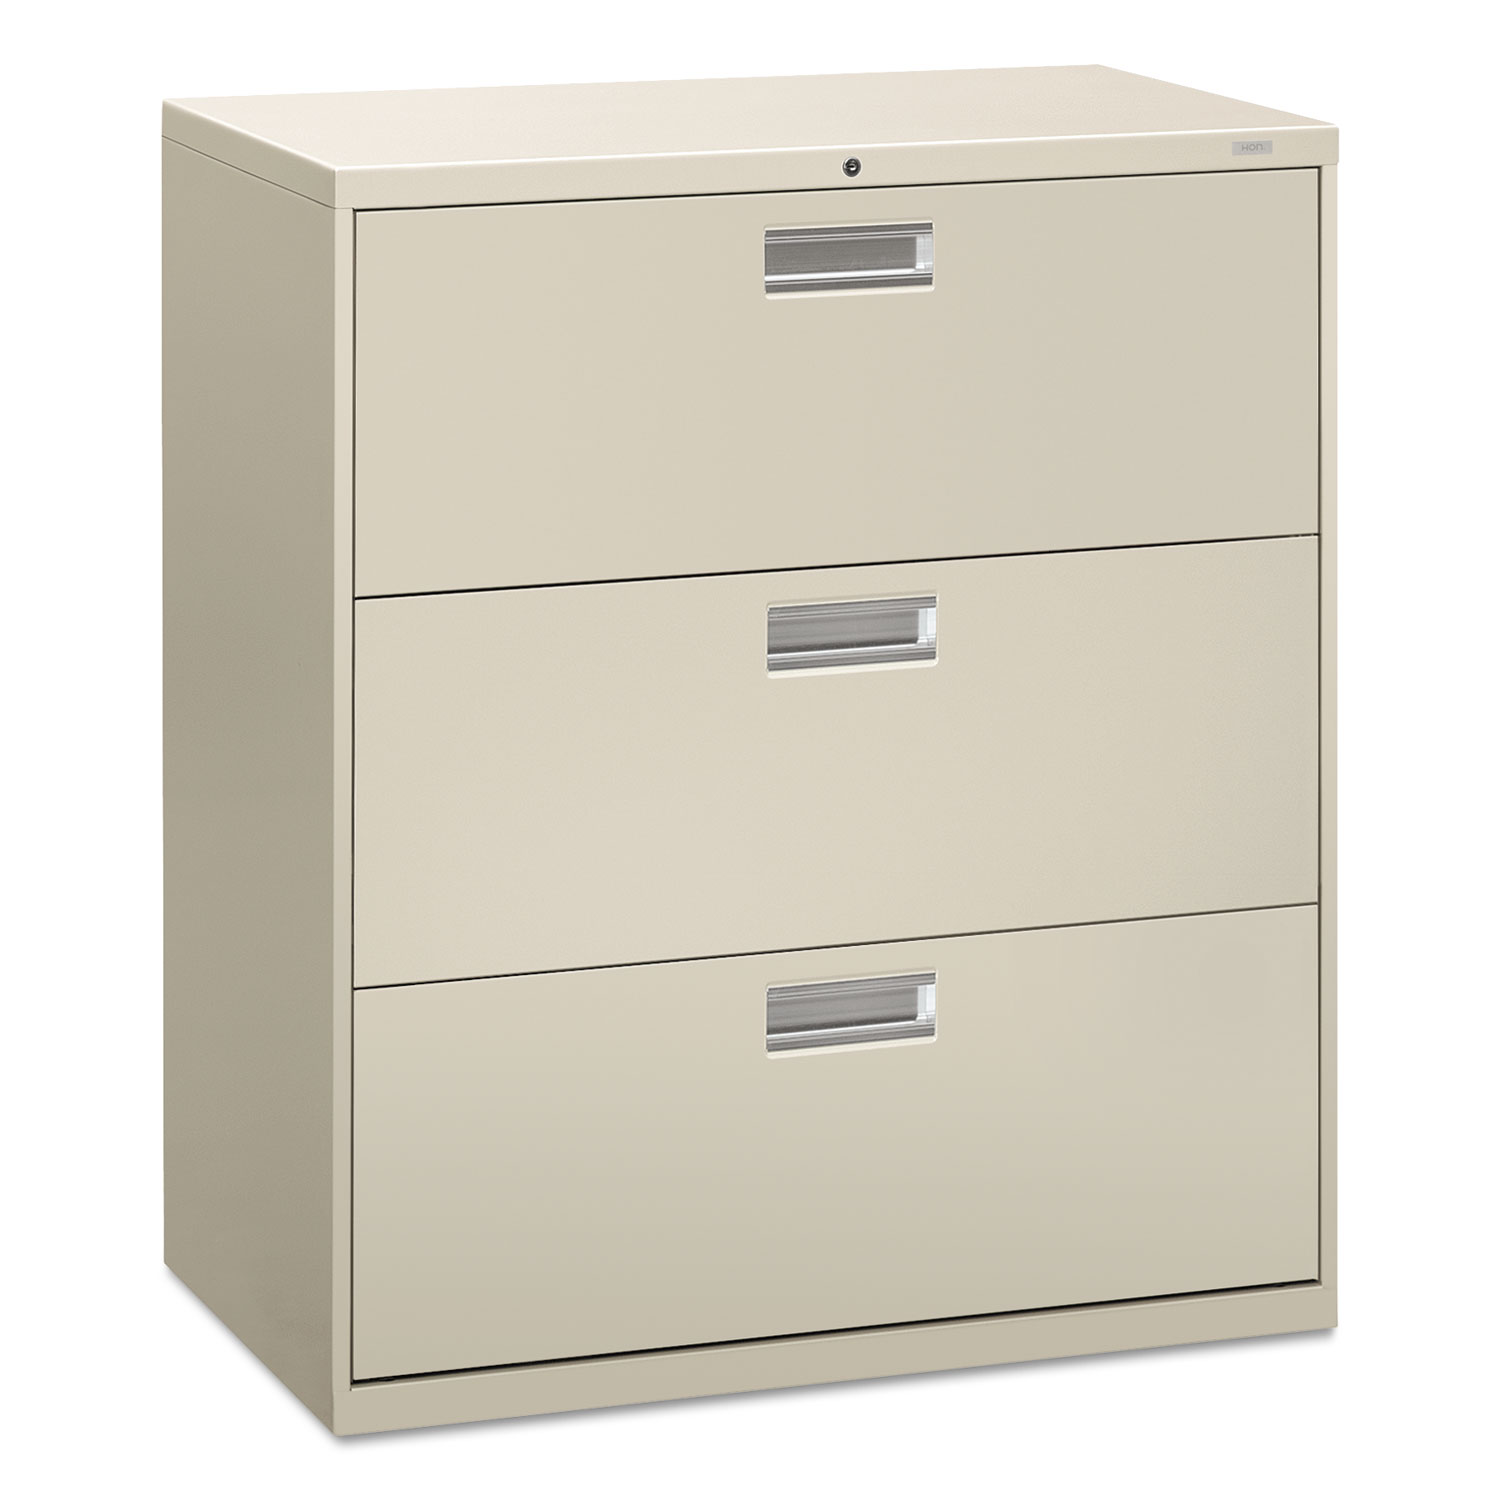 600 Series Three-Drawer Lateral File, 36w x 18d x 39 1/8h, Light Gray